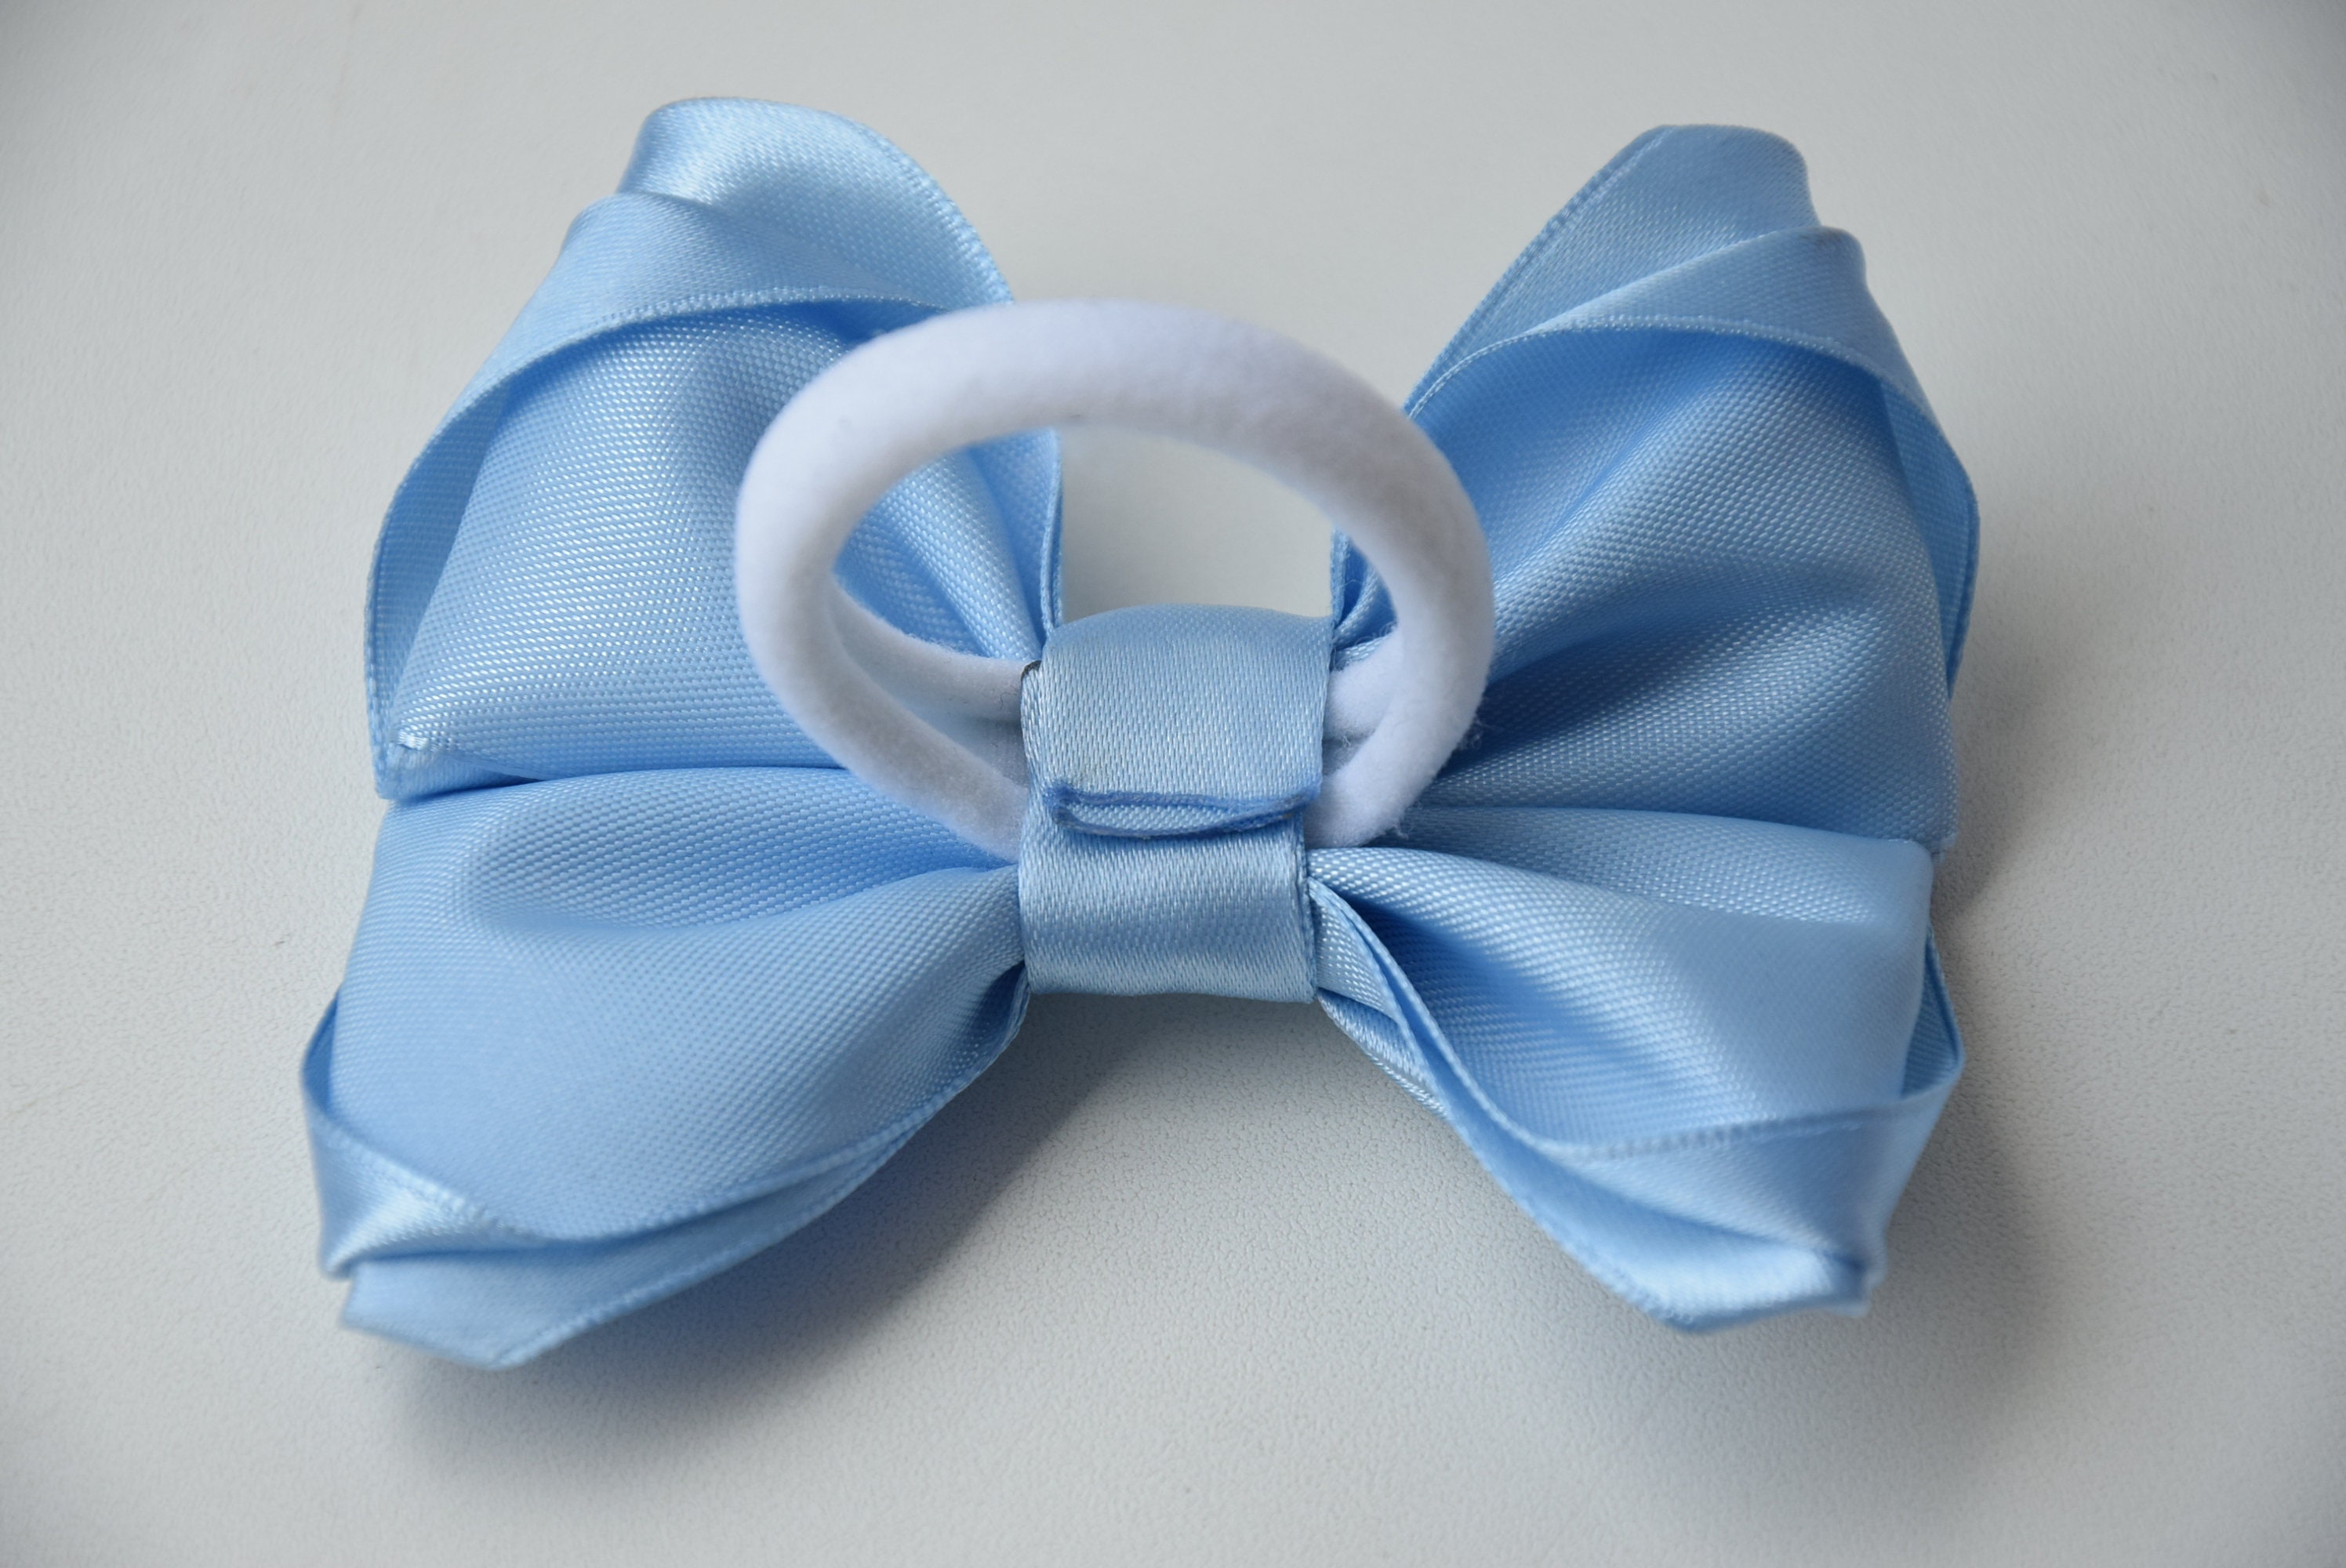 6. Blue hair accessories for kids - wide 5